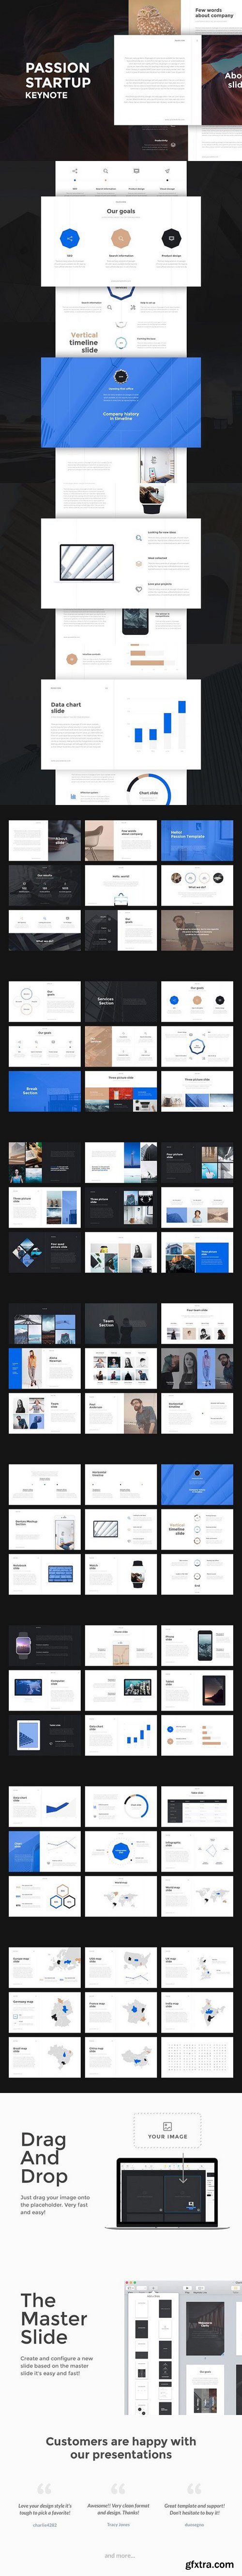 CM - Passion Keynote Template + GIFT 1409802